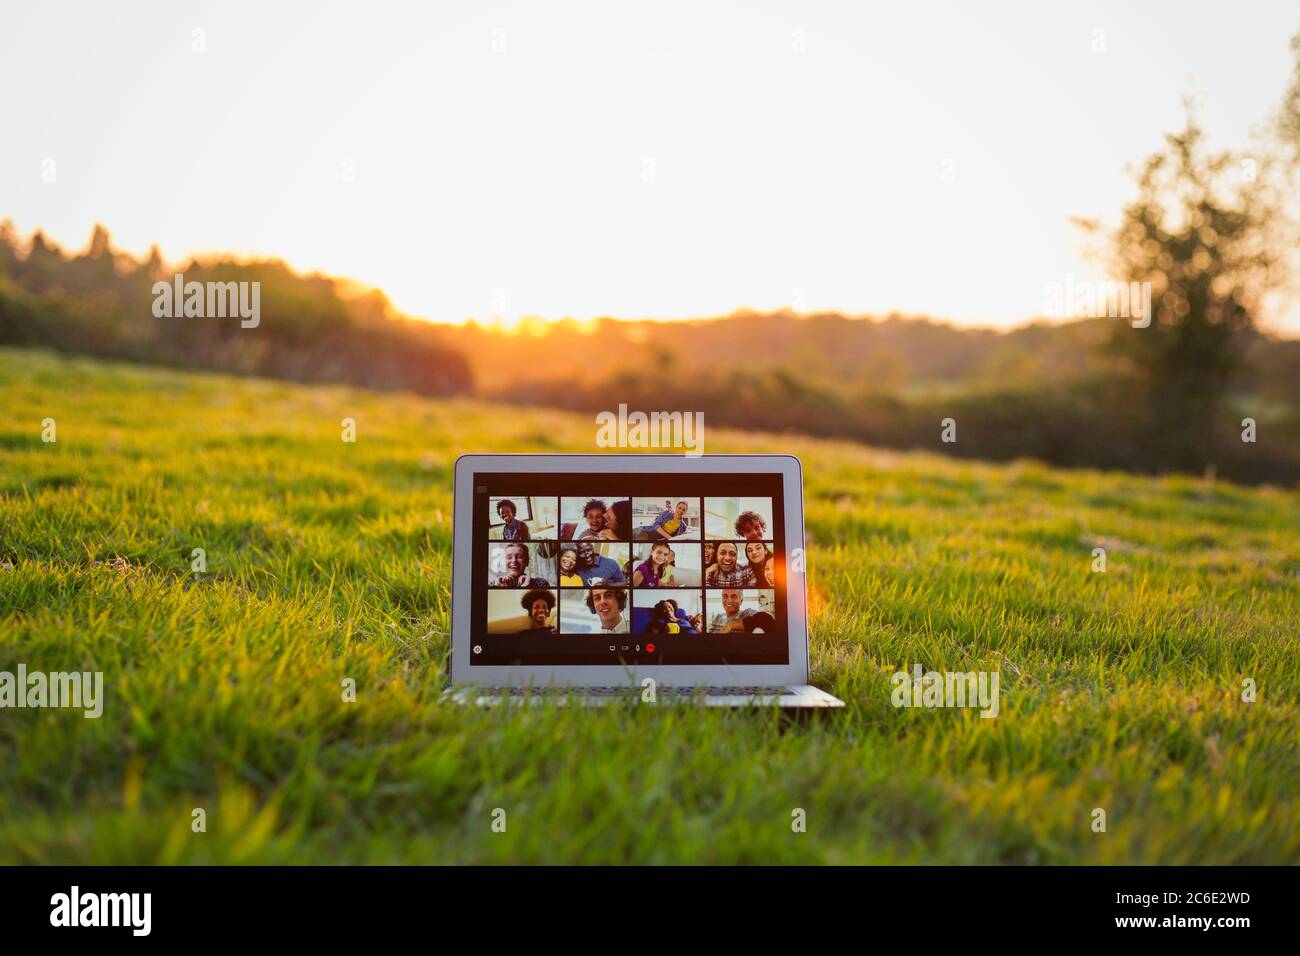 Friends video chatting on laptop screen in sunny grass Stock Photo